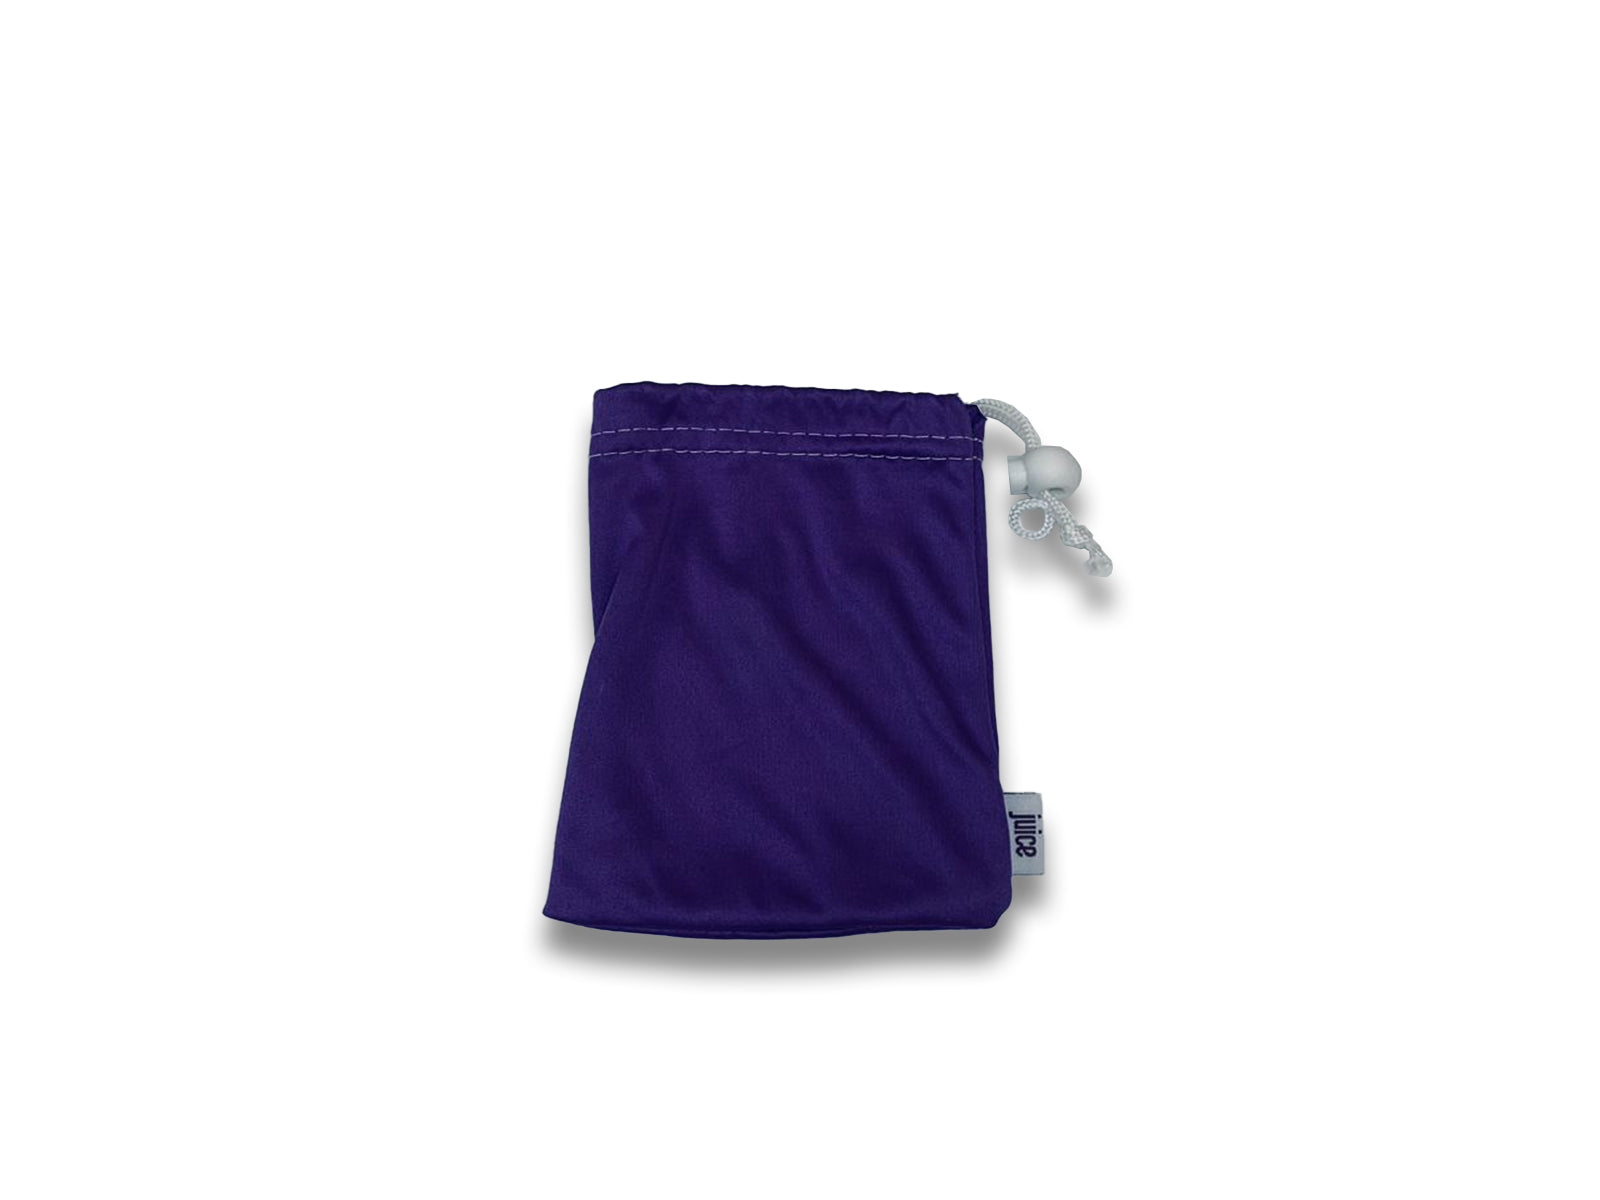 Image shows juice pouch that holds the charger and cable on white background